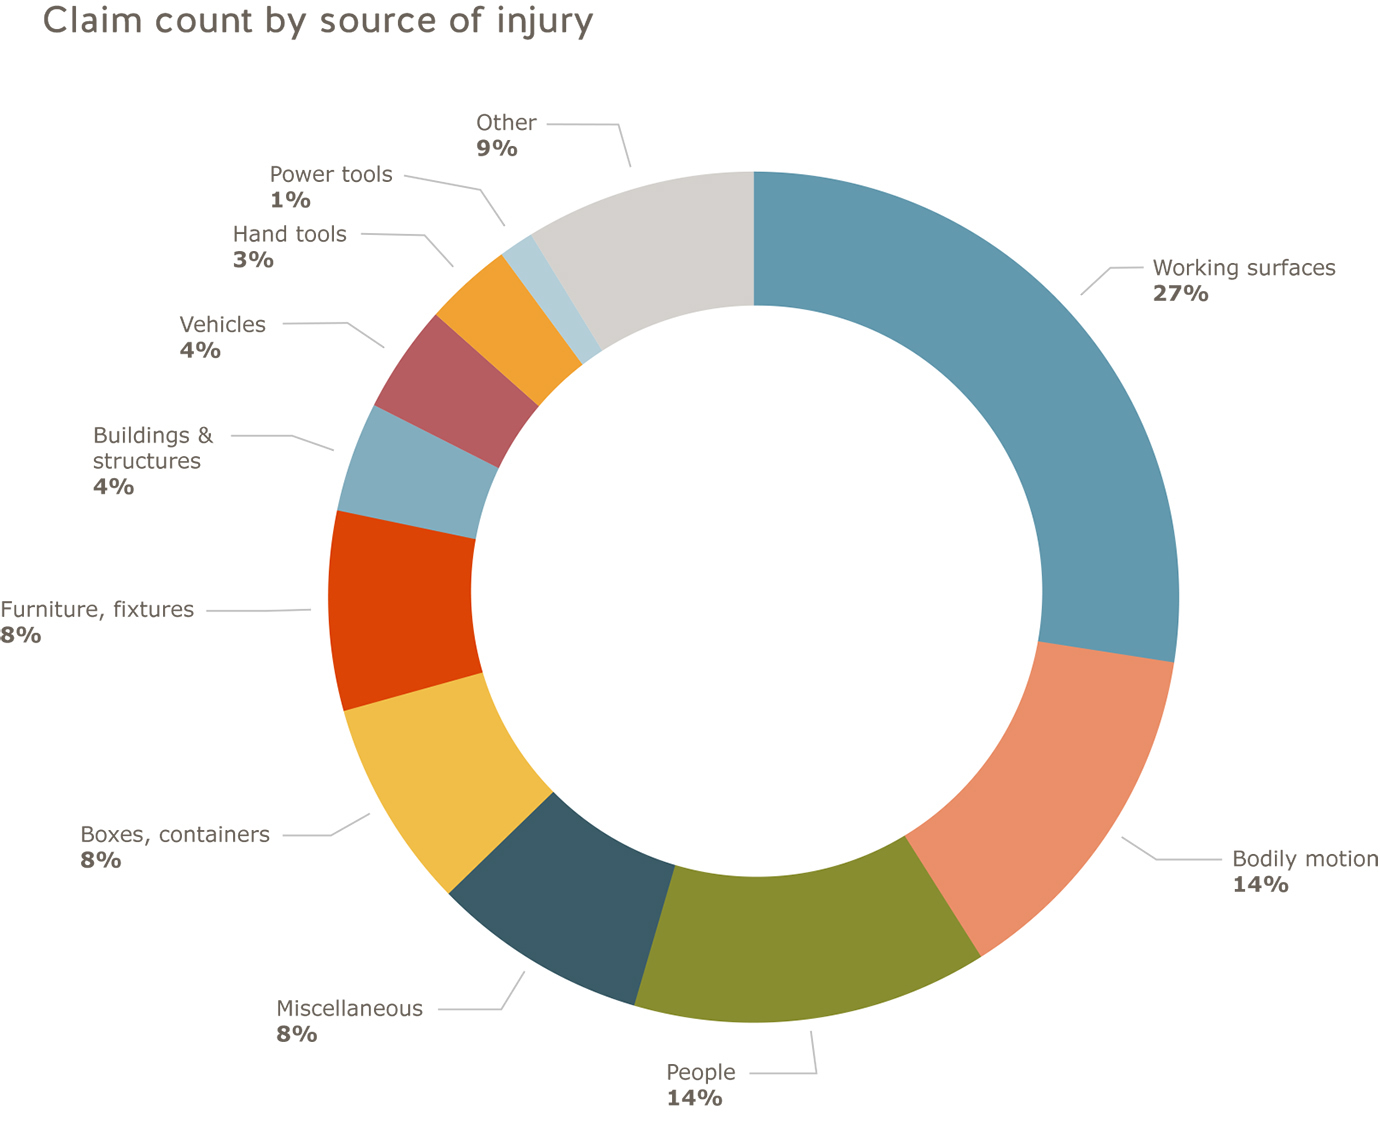 Education sector claim count by source of  injury: working surfaces=27%; bodily motion=14%; people=14%; miscellaneous=8%; boxes,containers=8%; furniture,fixtures=8%; buildings & structures=4%; vehicles=4%; hand tools=3%; power tools=1%; other=9%